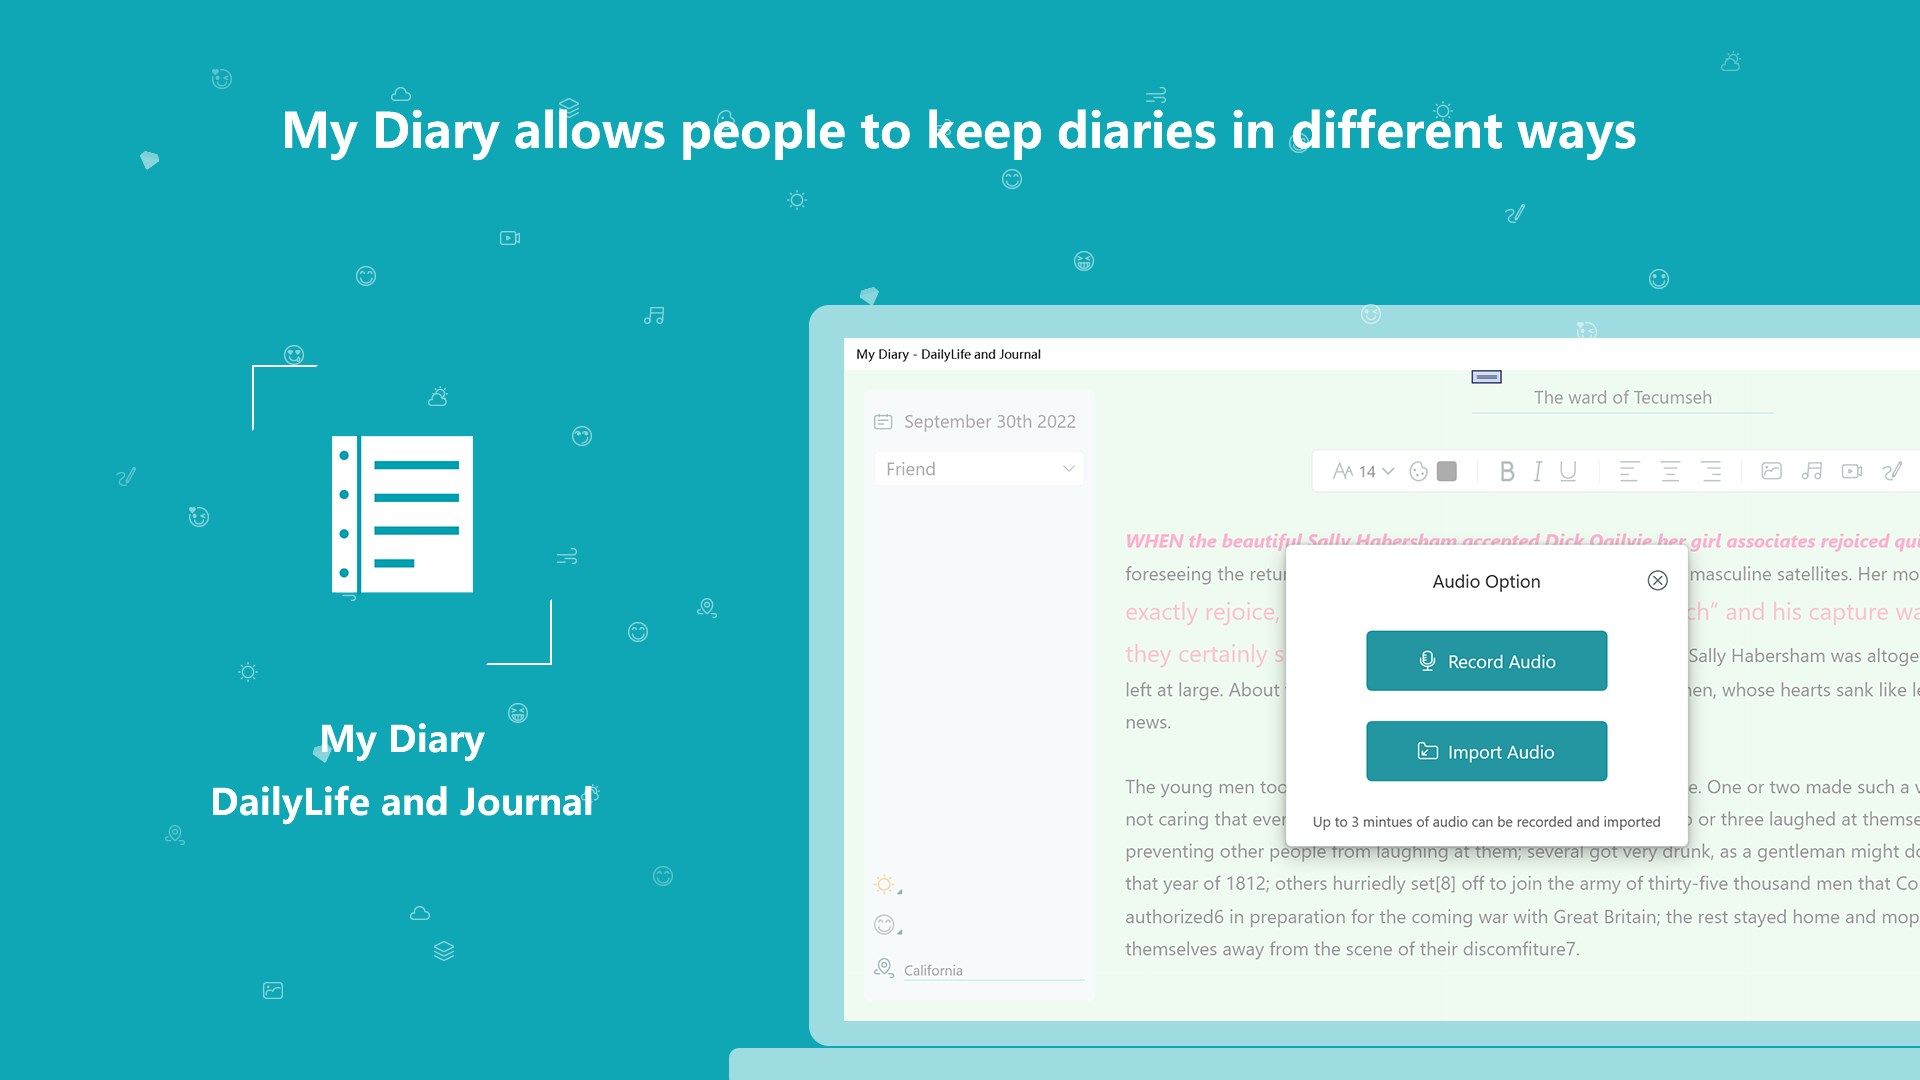 My Diary - DailyLife and Journal